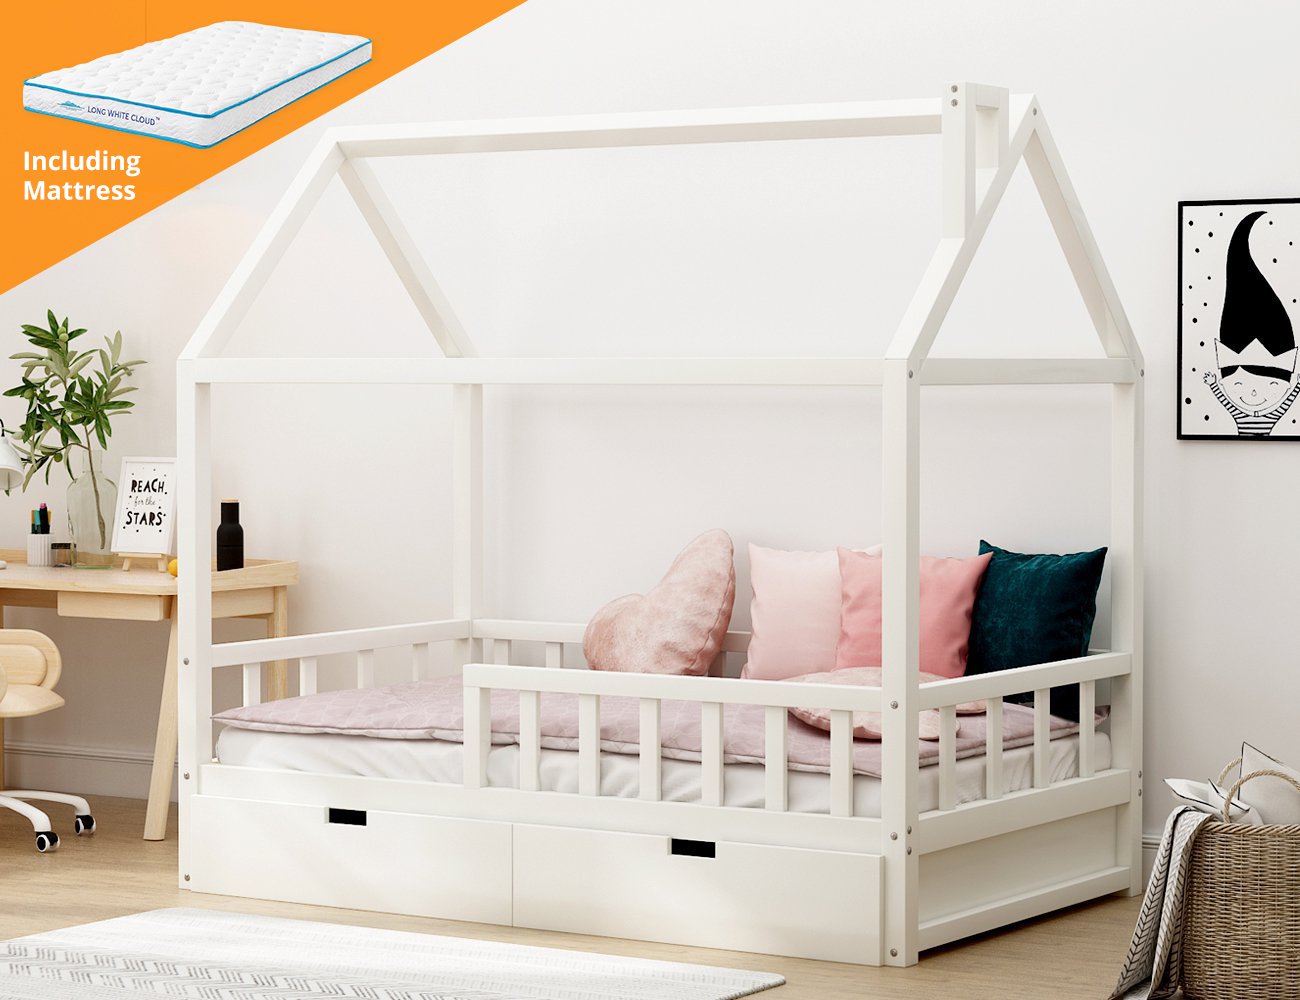 elevating bed frame with mattress set